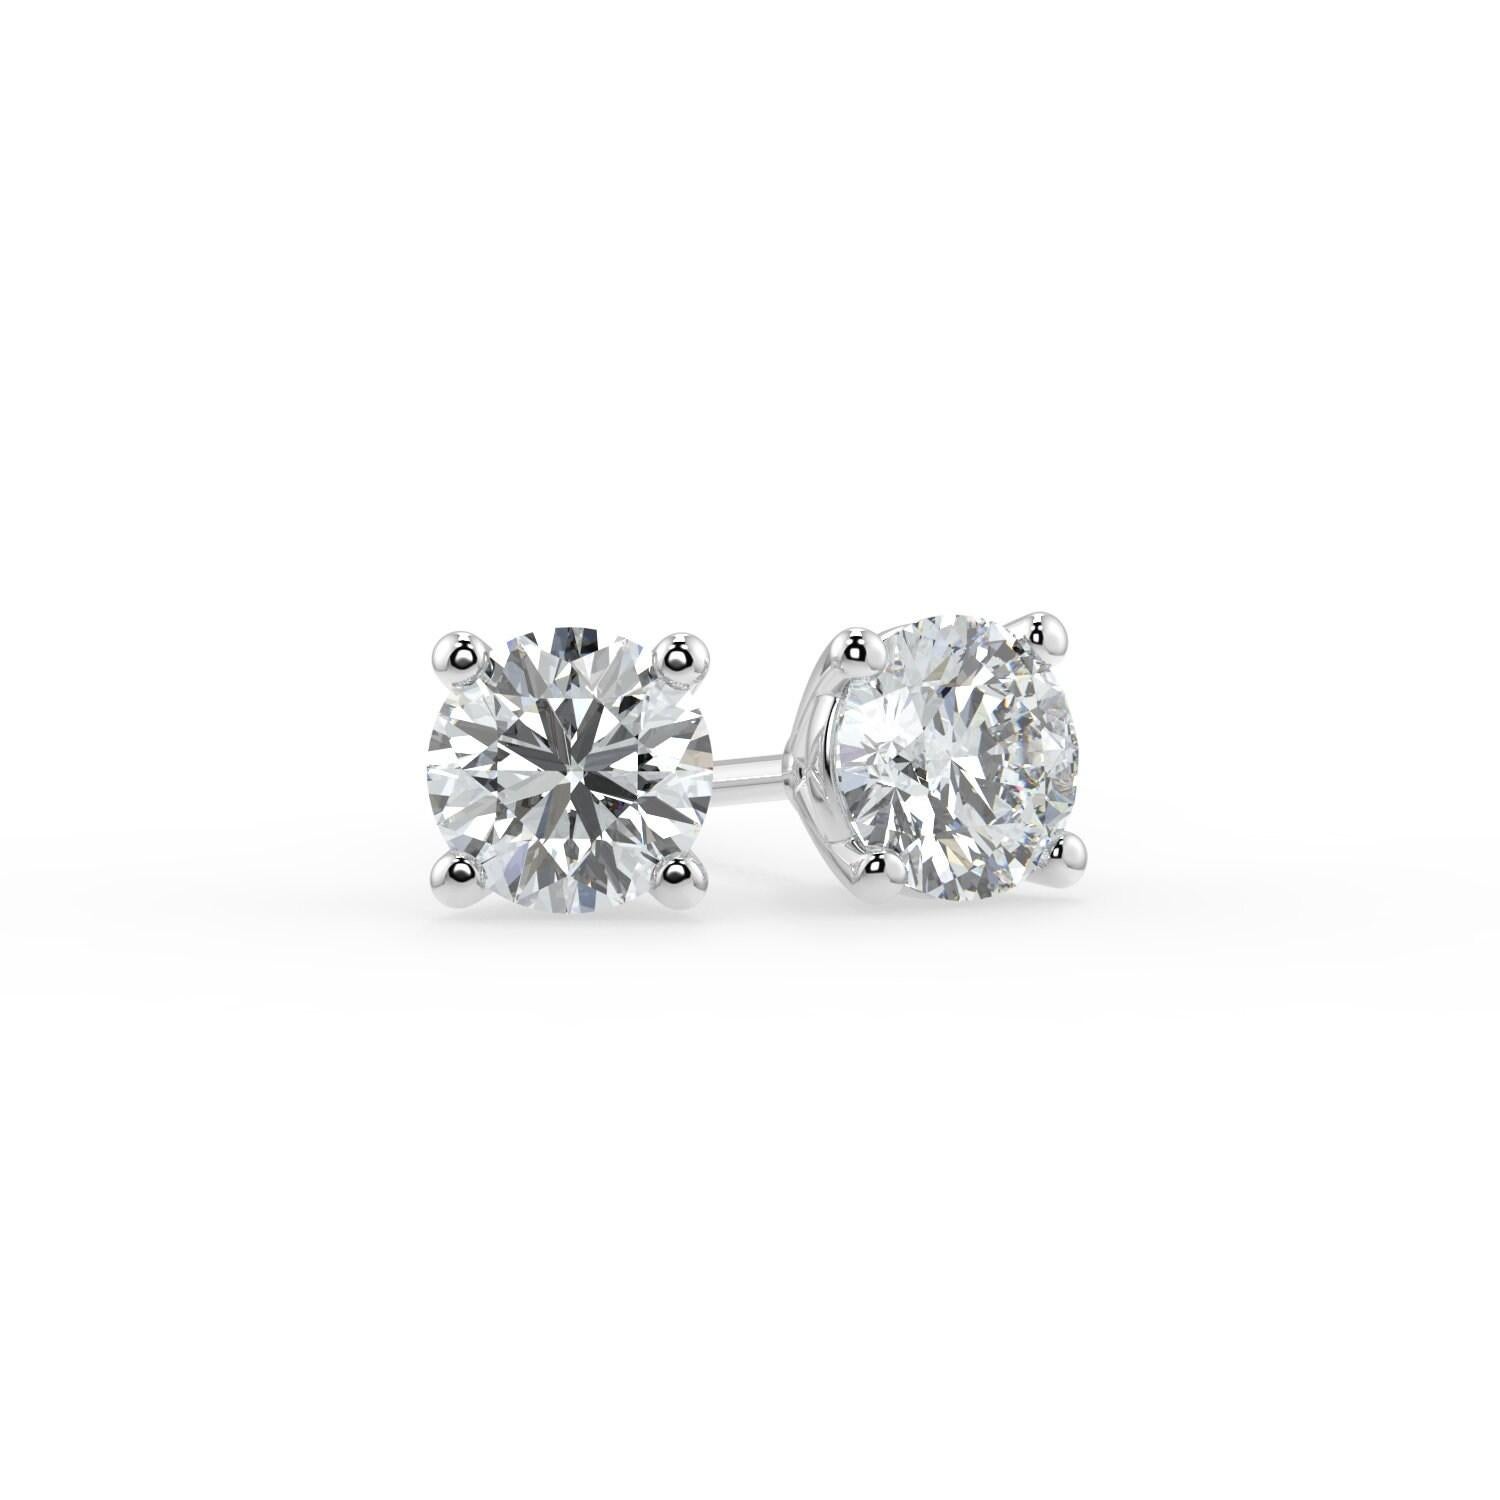 1ct Natural Diamond SI Clarity Round Shape Solitaire 4 Prong Martini Style Unisex Studs with Butterfly Pushbacks 14K White Gold 
Specifications:
Metal: 14k white gold 
Diamond Shape: Round
Natural Diamond carat weight: 1 CTW
Diamond Clarity: